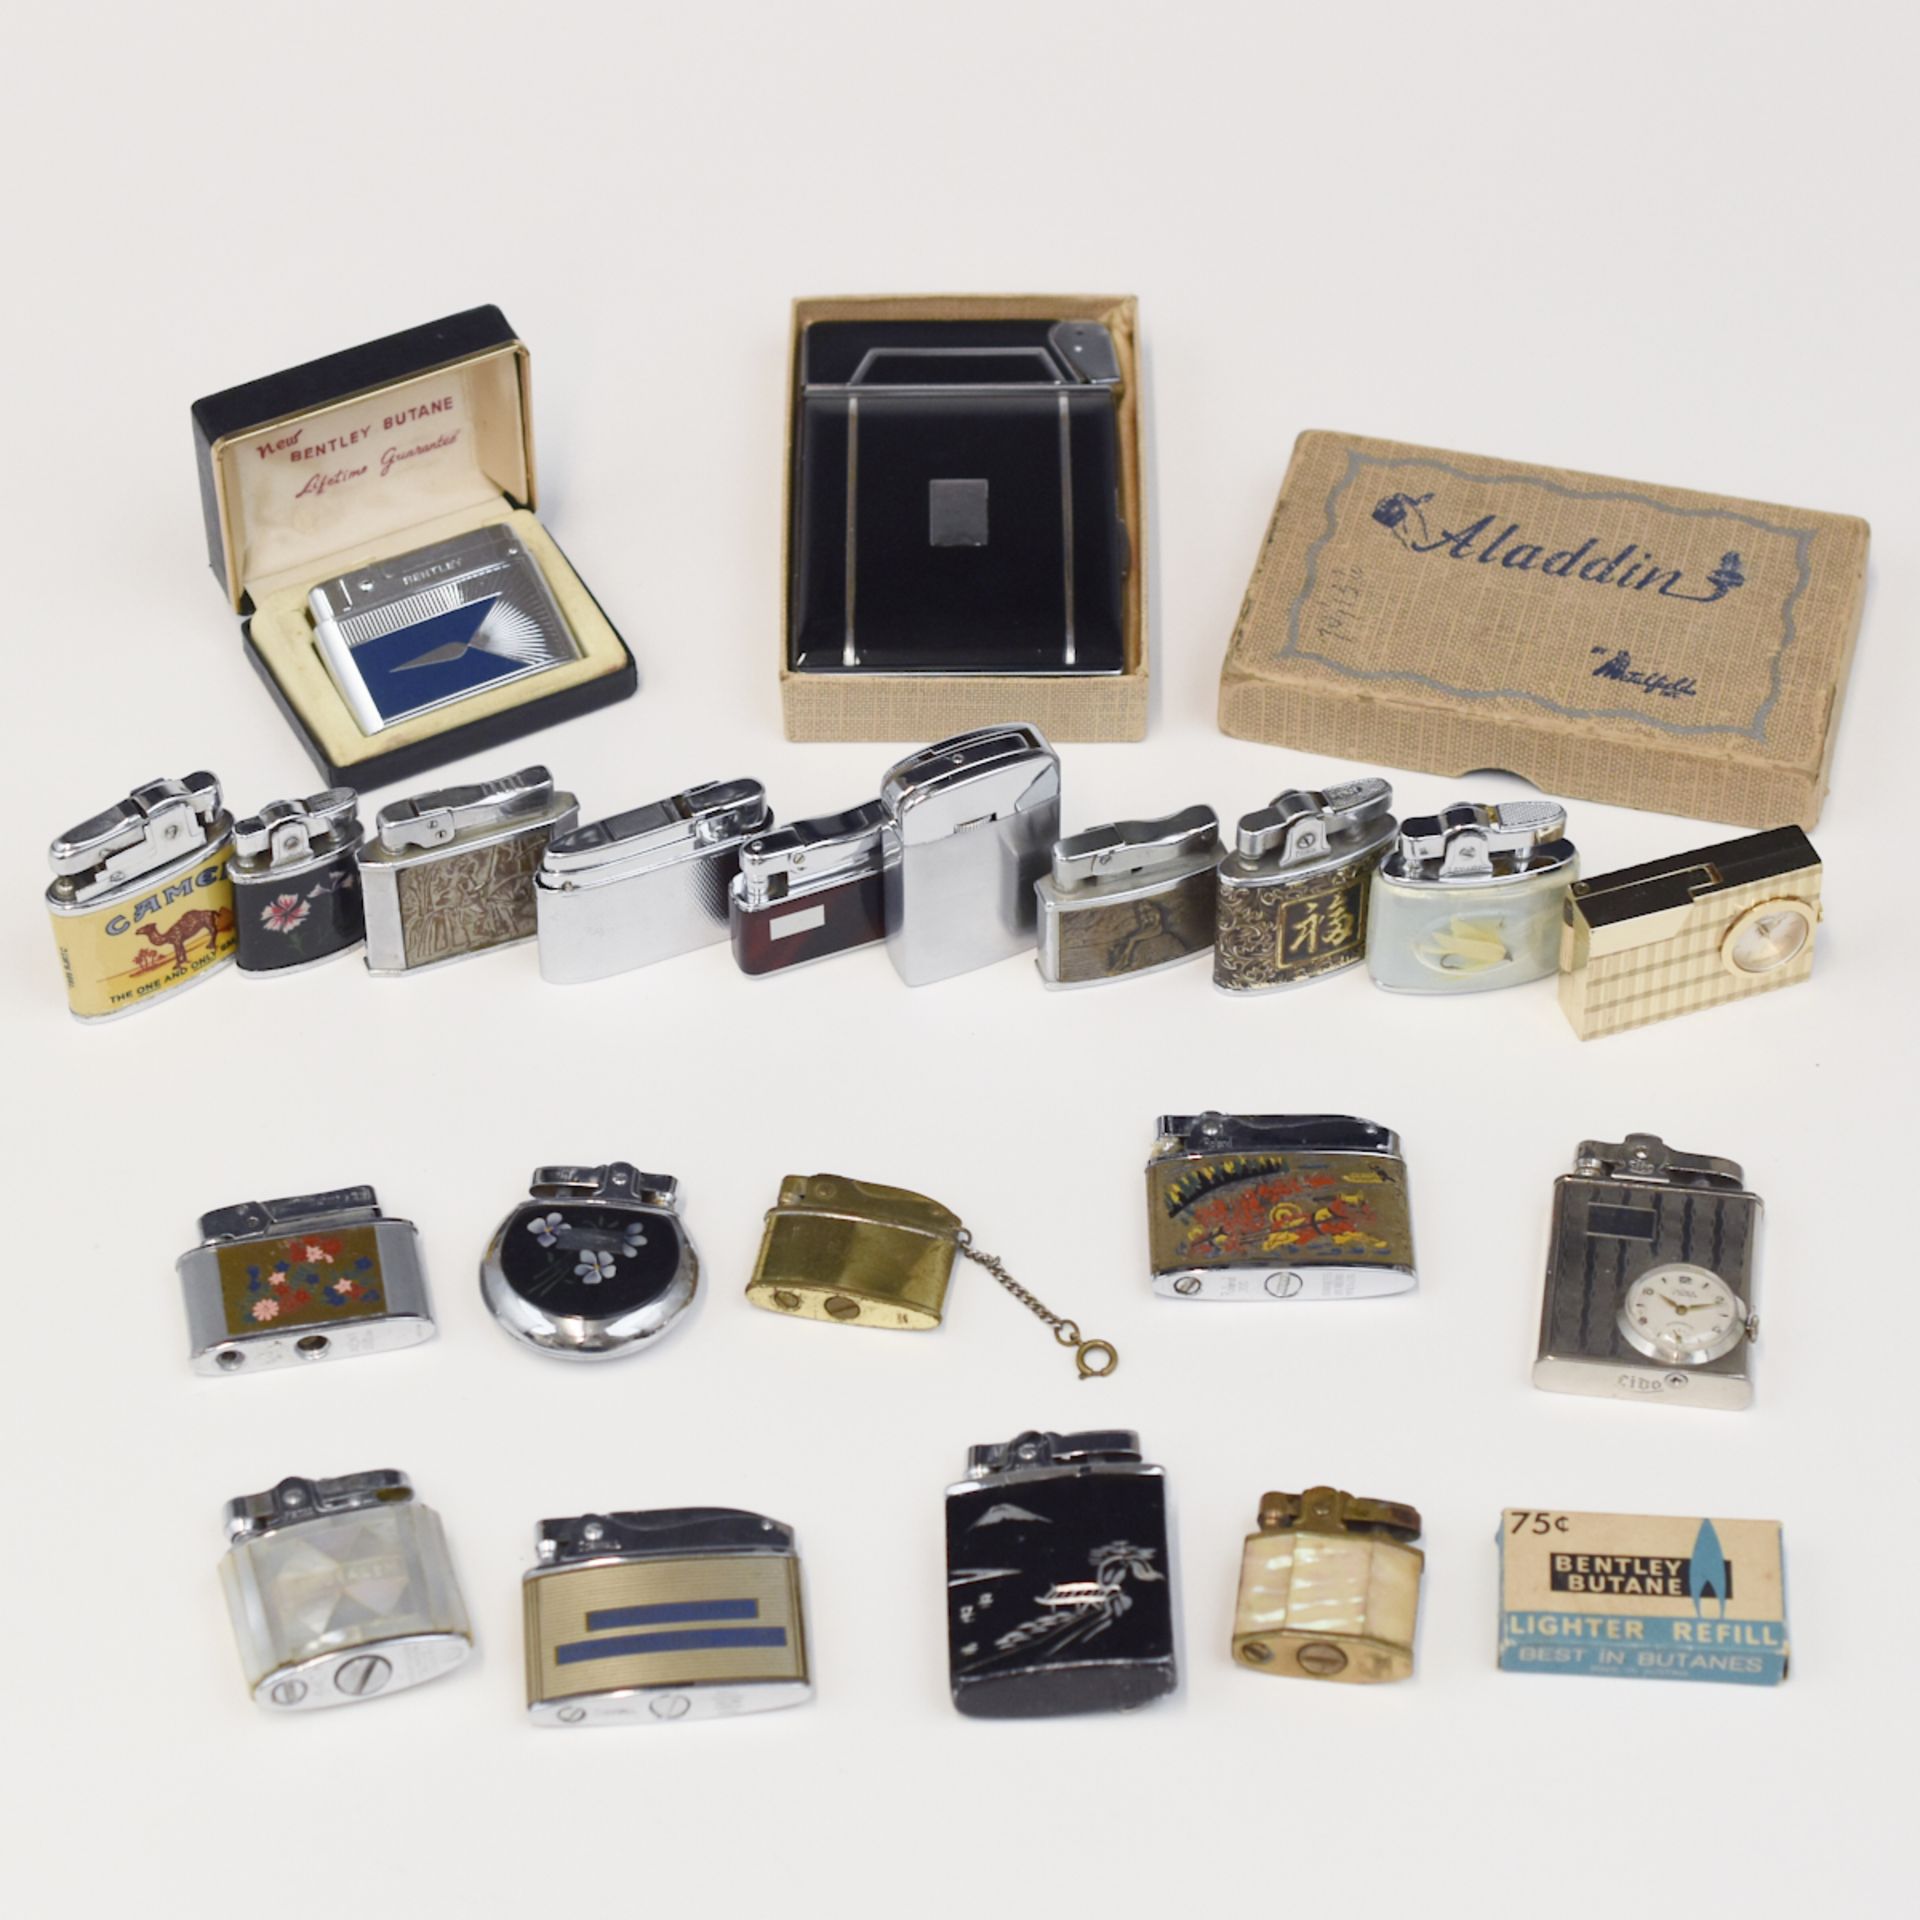 Lrg Grp: Assorted Mechanical Lighters and Cigarette Case